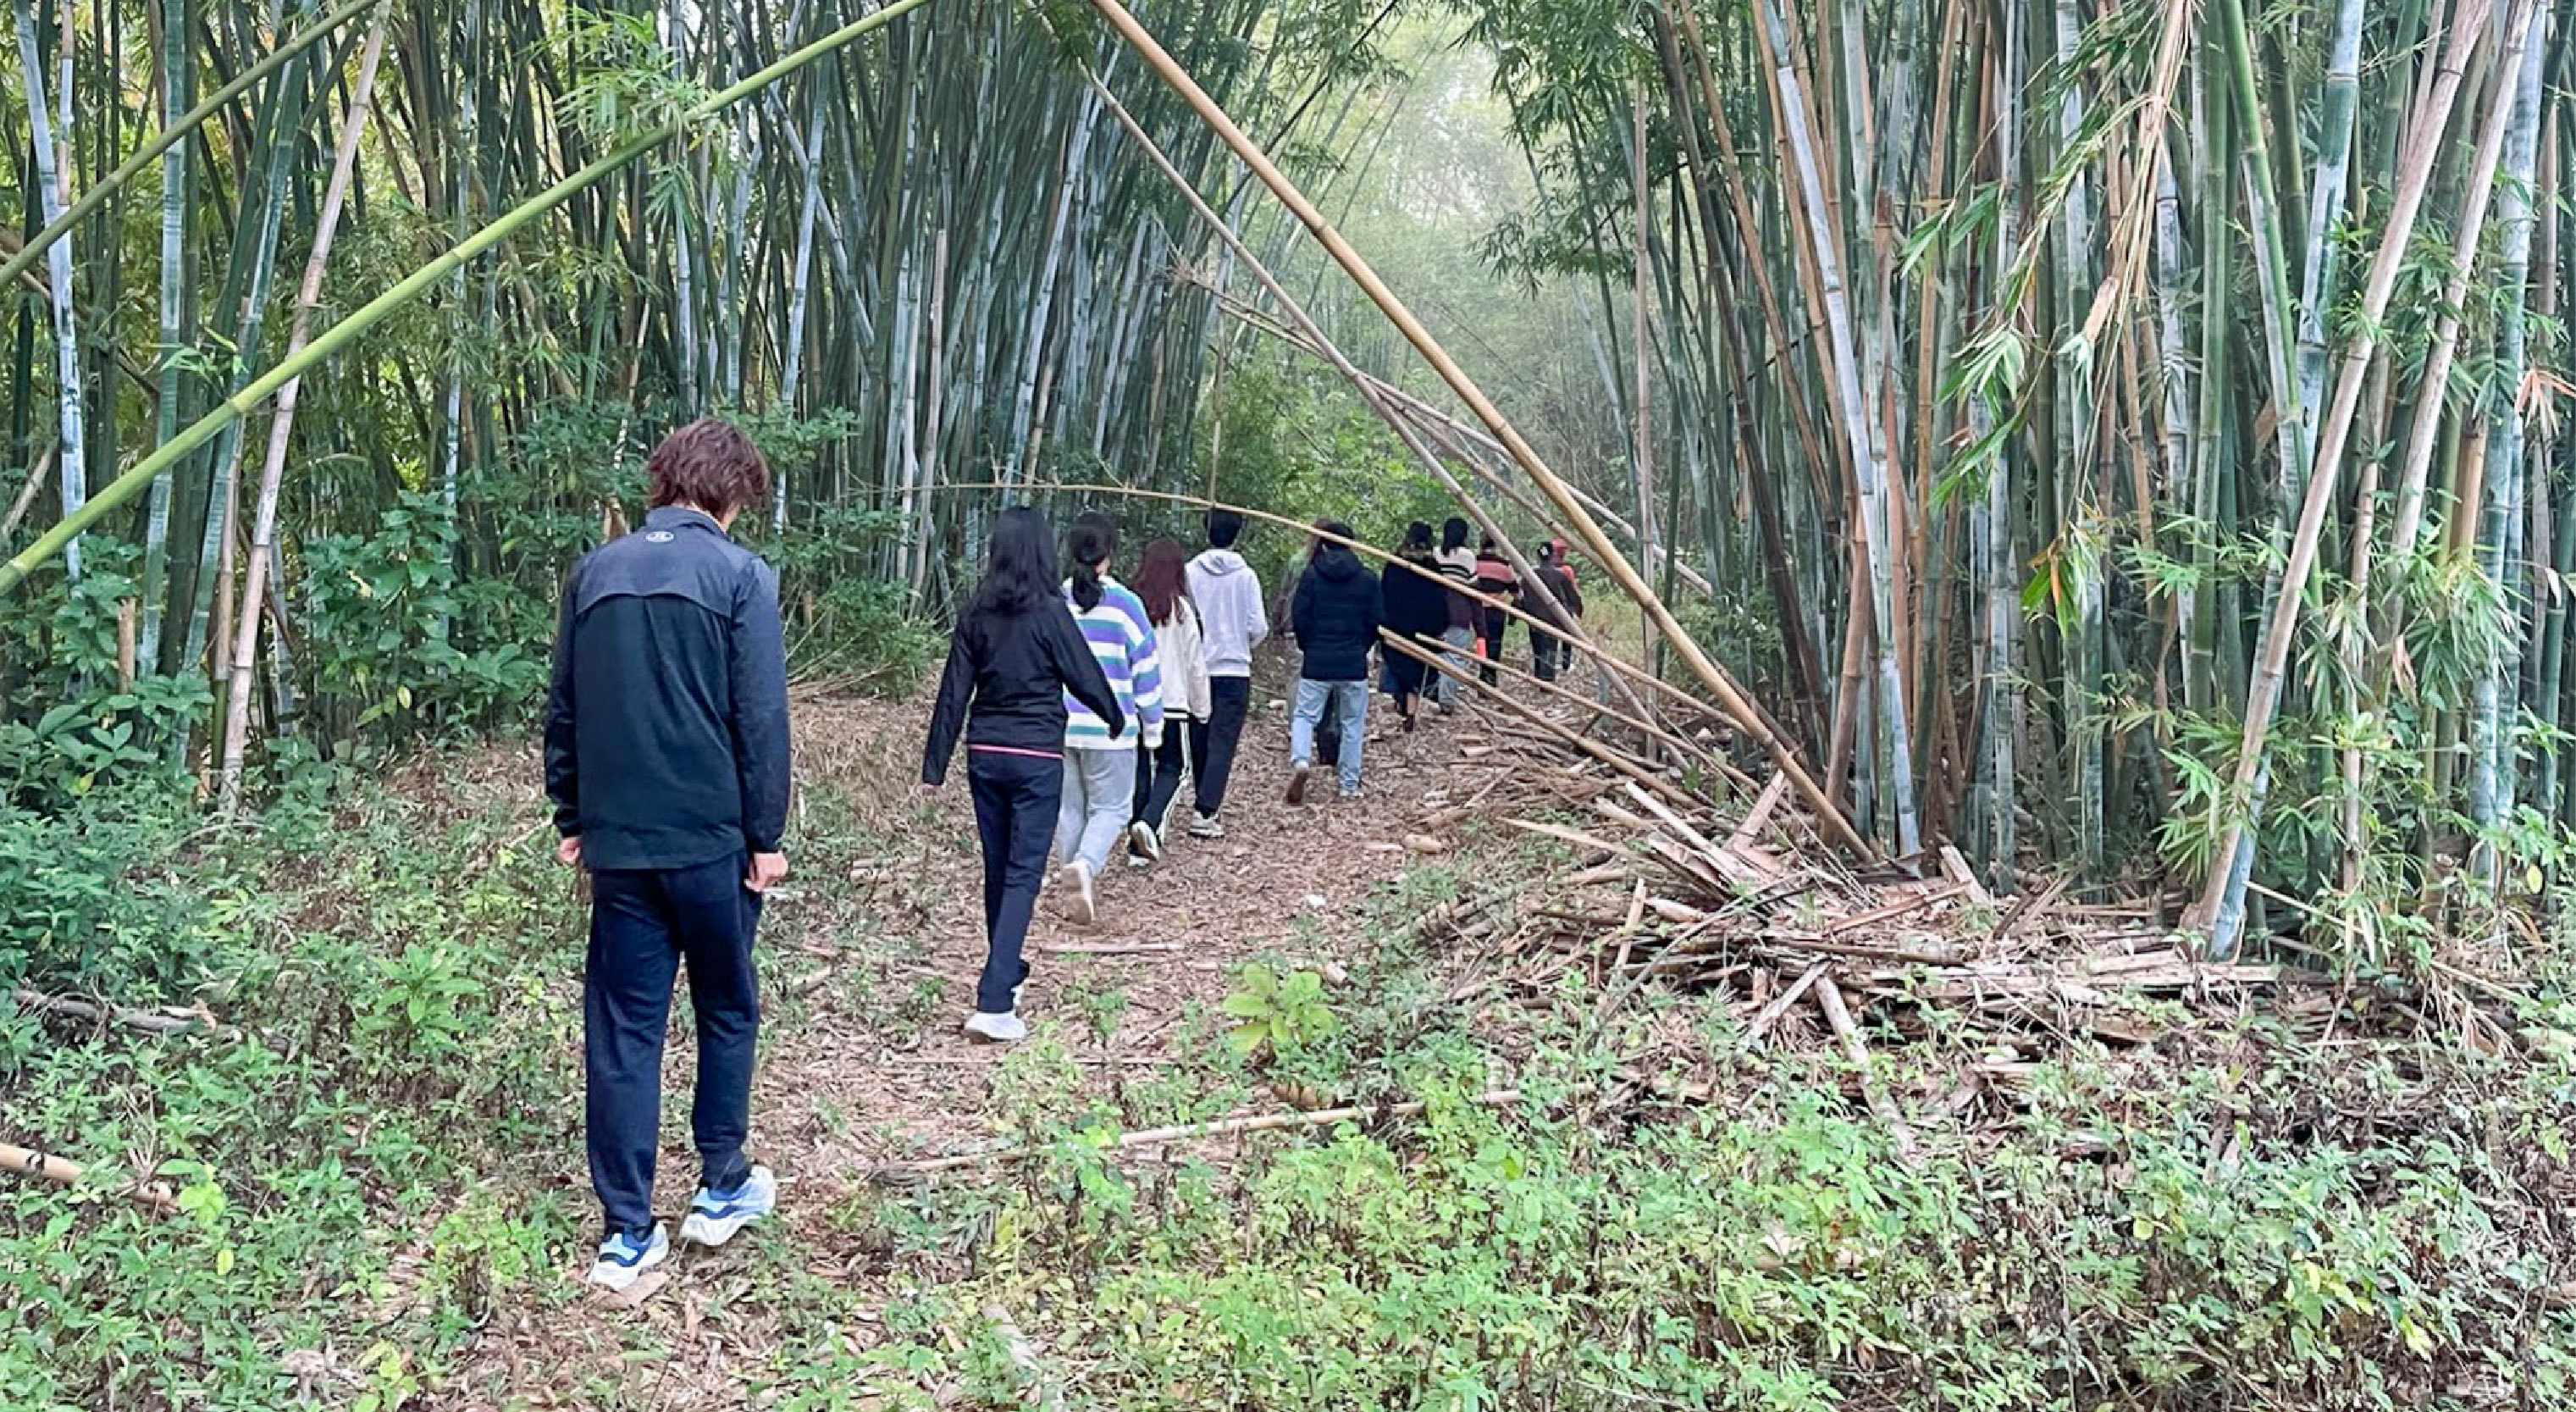 students hiking in guangdong province